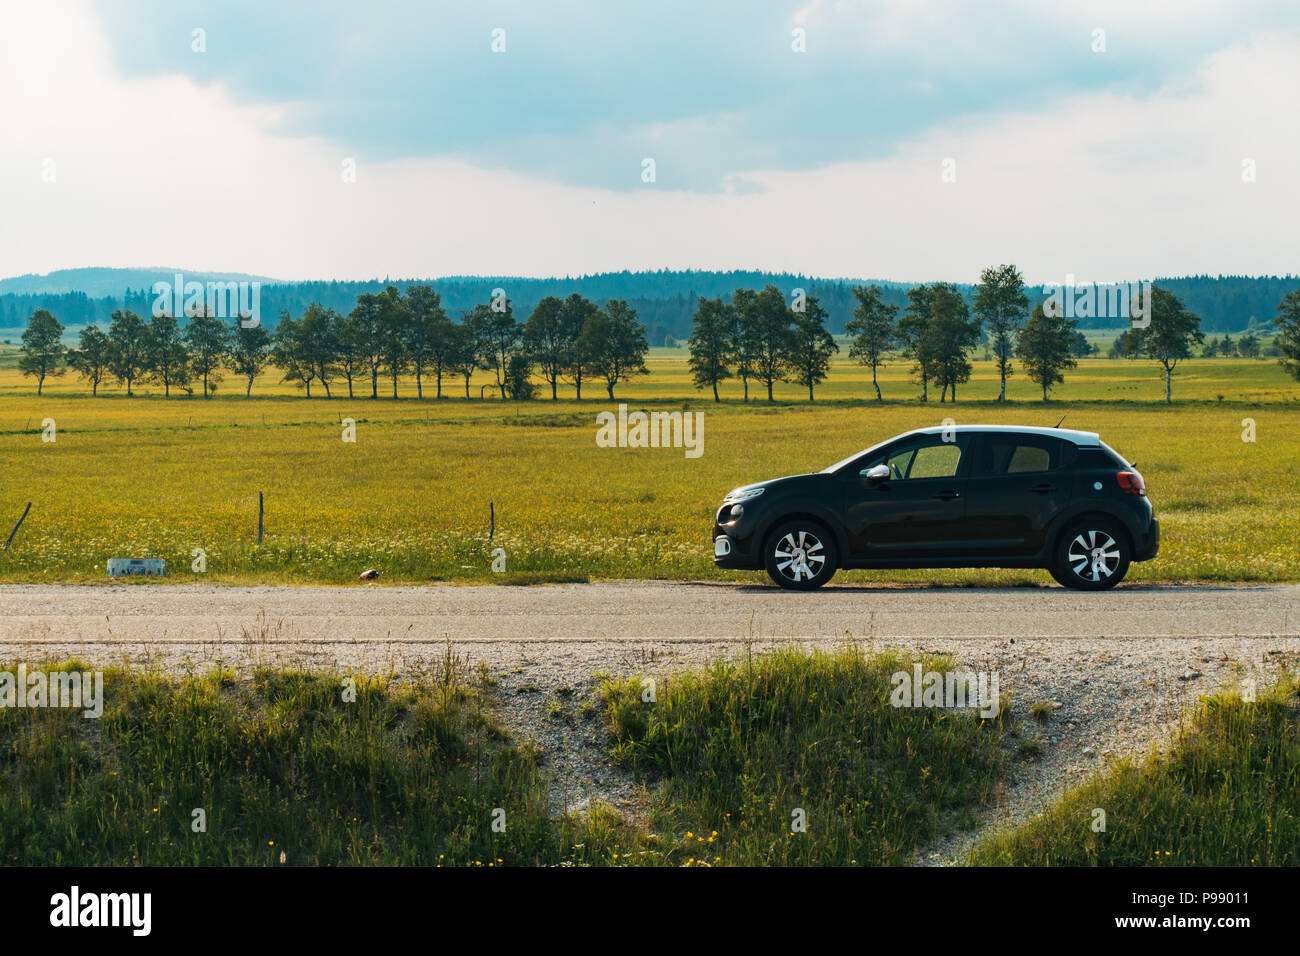 A Citroën C3 hatchback in black with a white roof sits parked on the side of the road next to farmland in Bosnia and Herzegovina Stock Photo